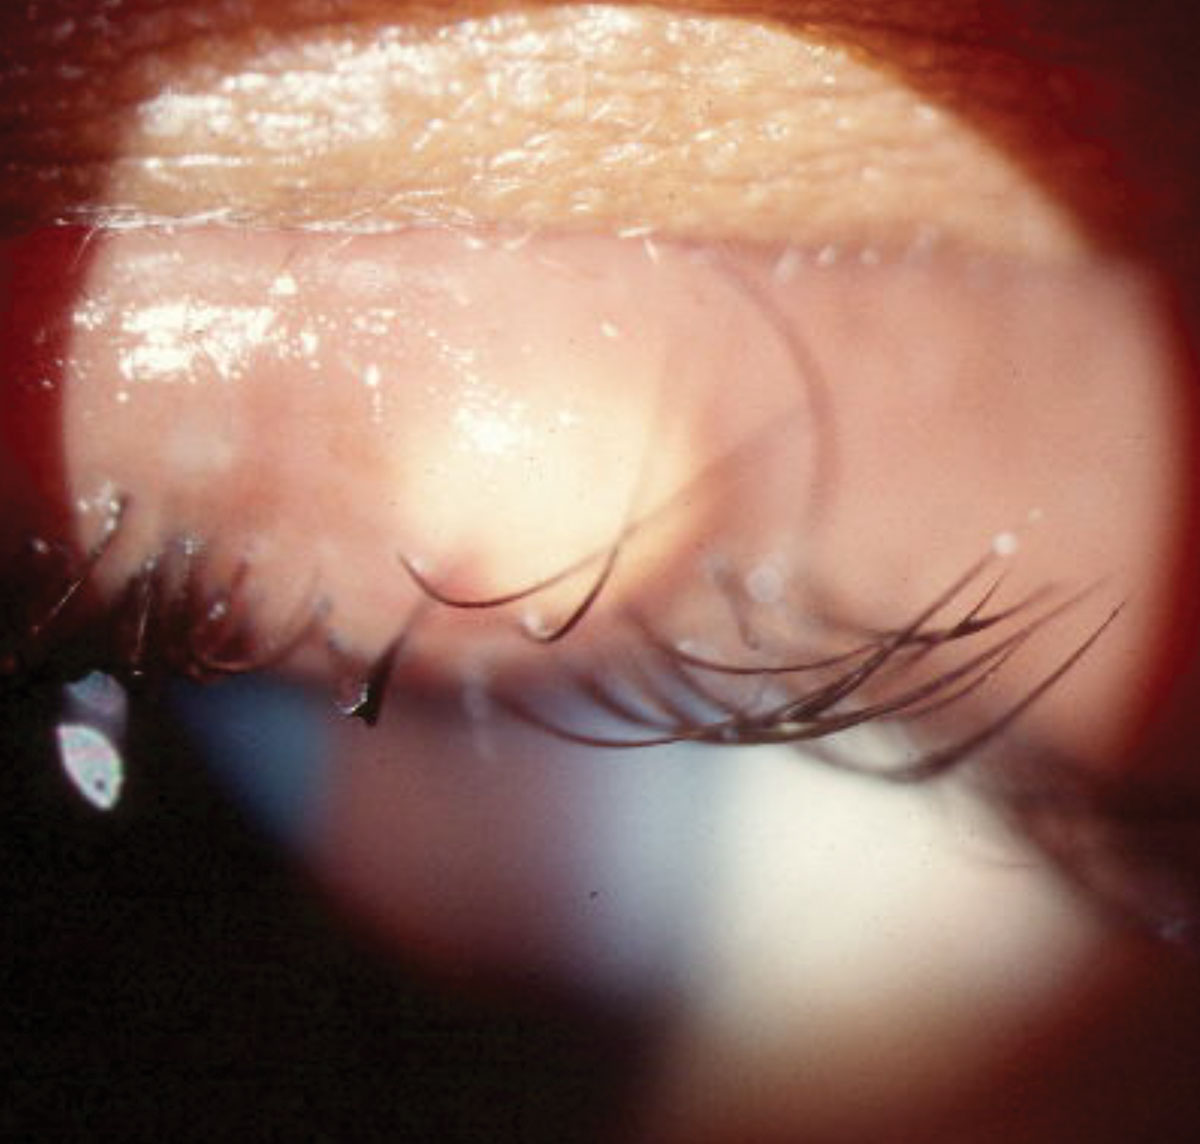 Fig. 1. Localized swelling secondary to an external hordeolum pointing anteriorly through the eyelid skin.